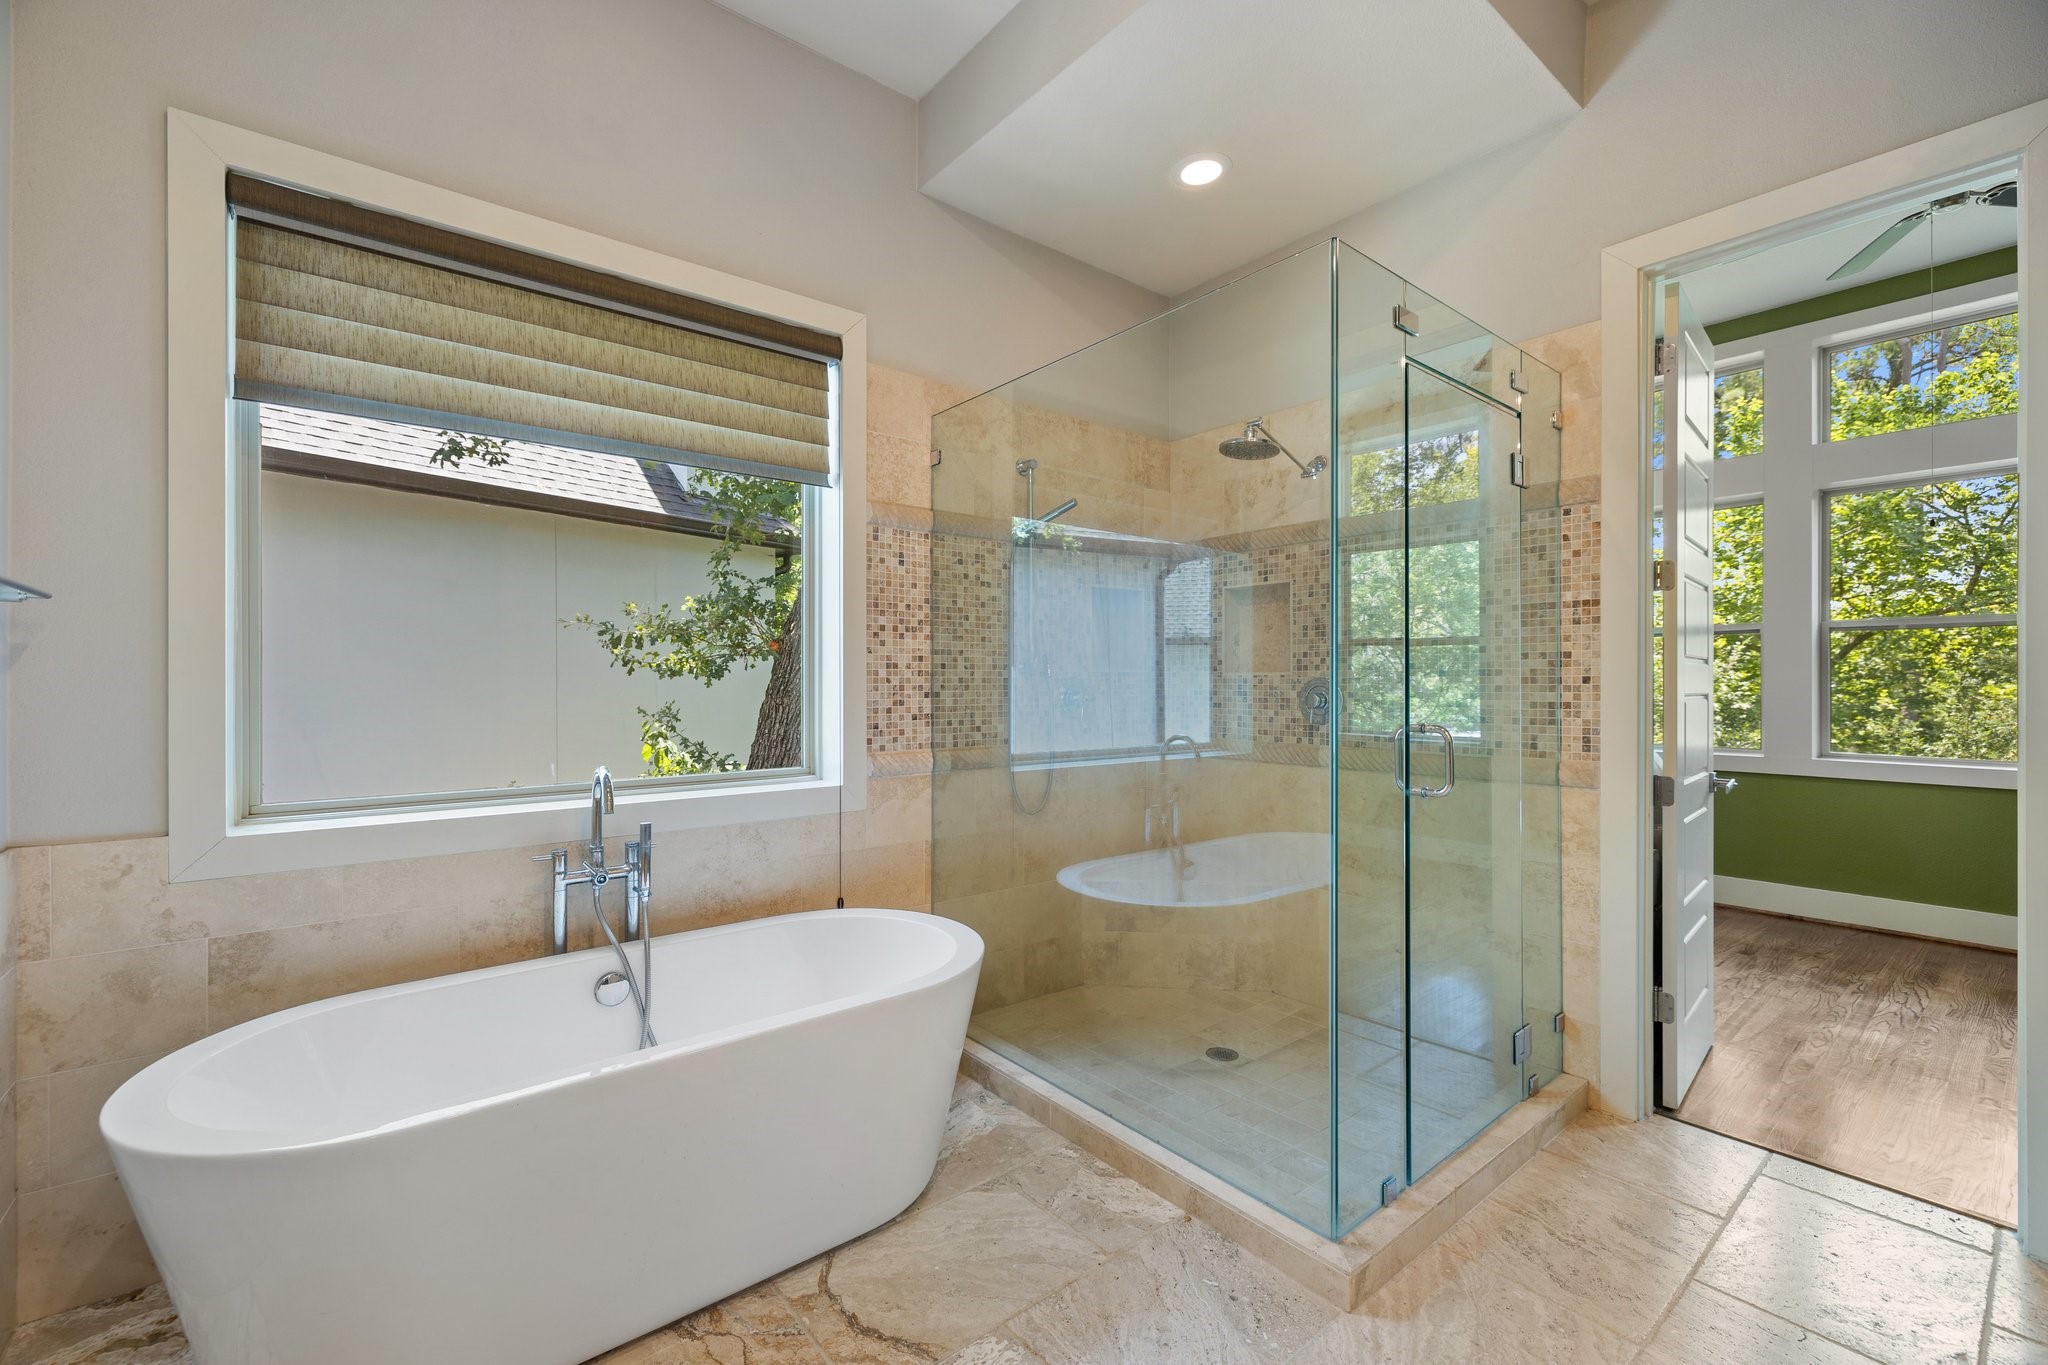 Stone flooring and accents abound in the primary bath areas, expansive custom walk in shower.